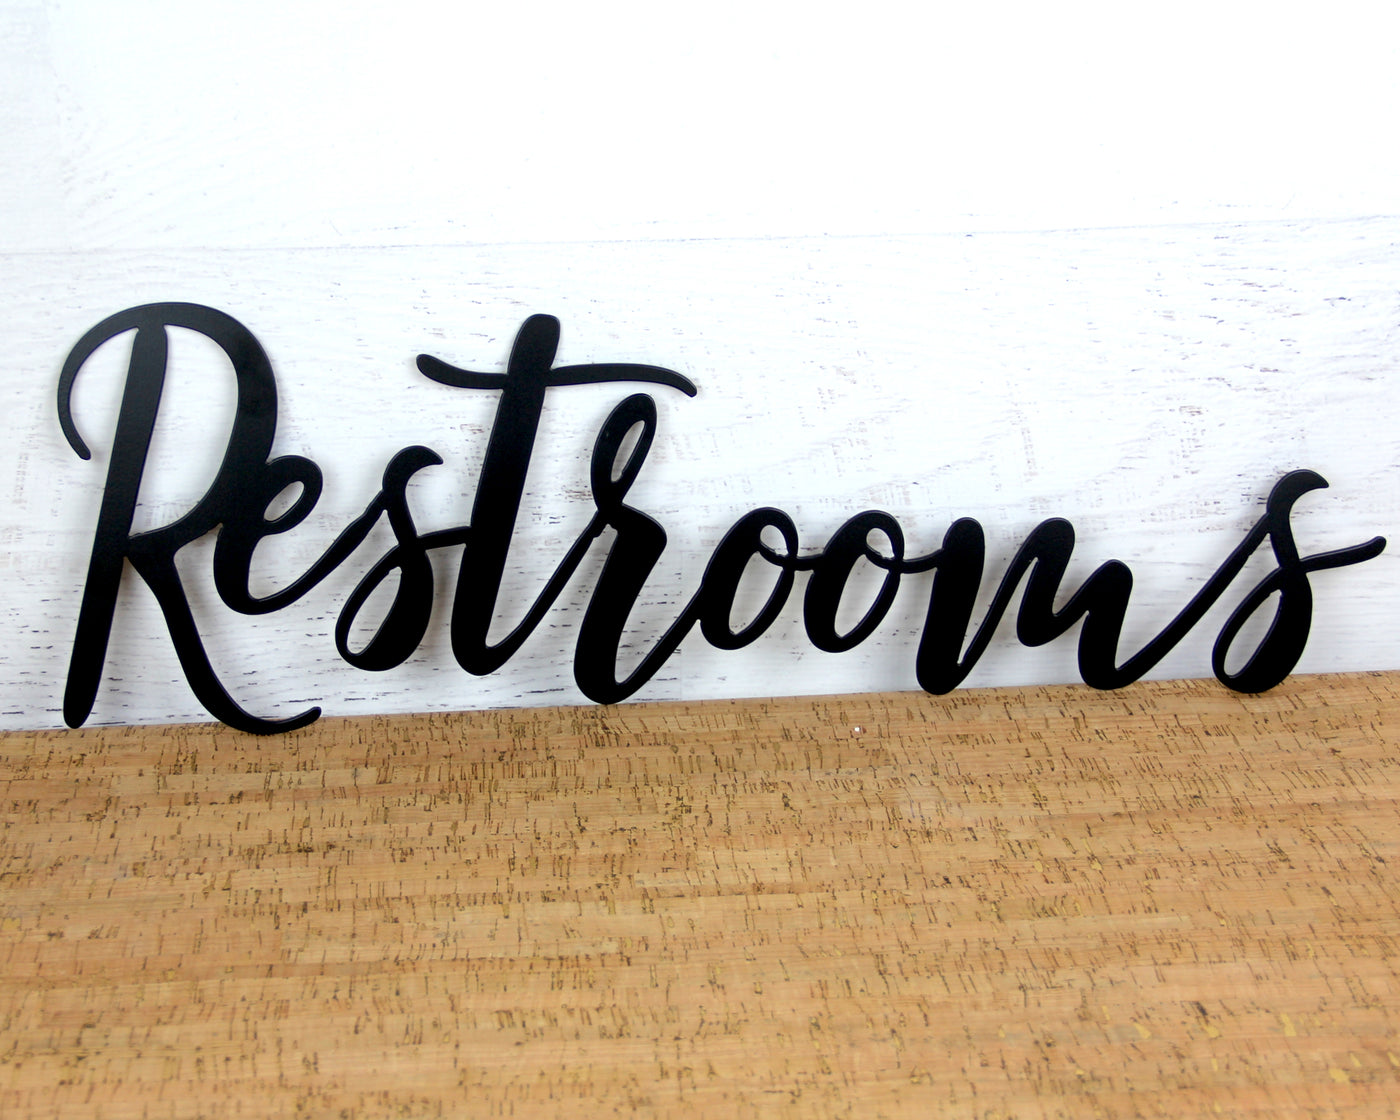 Restroom or Restrooms Sign Metal Word Sign - Madison Iron and Wood - Wall Art - metal outdoor decor - Steel deocrations - american made products - veteran owned business products - fencing decorations - fencing supplies - custom wall decorations - personalized wall signs - steel - decorative post caps - steel post caps - metal post caps - brackets - structural brackets - home improvement - easter - easter decorations - easter gift - easter yard decor